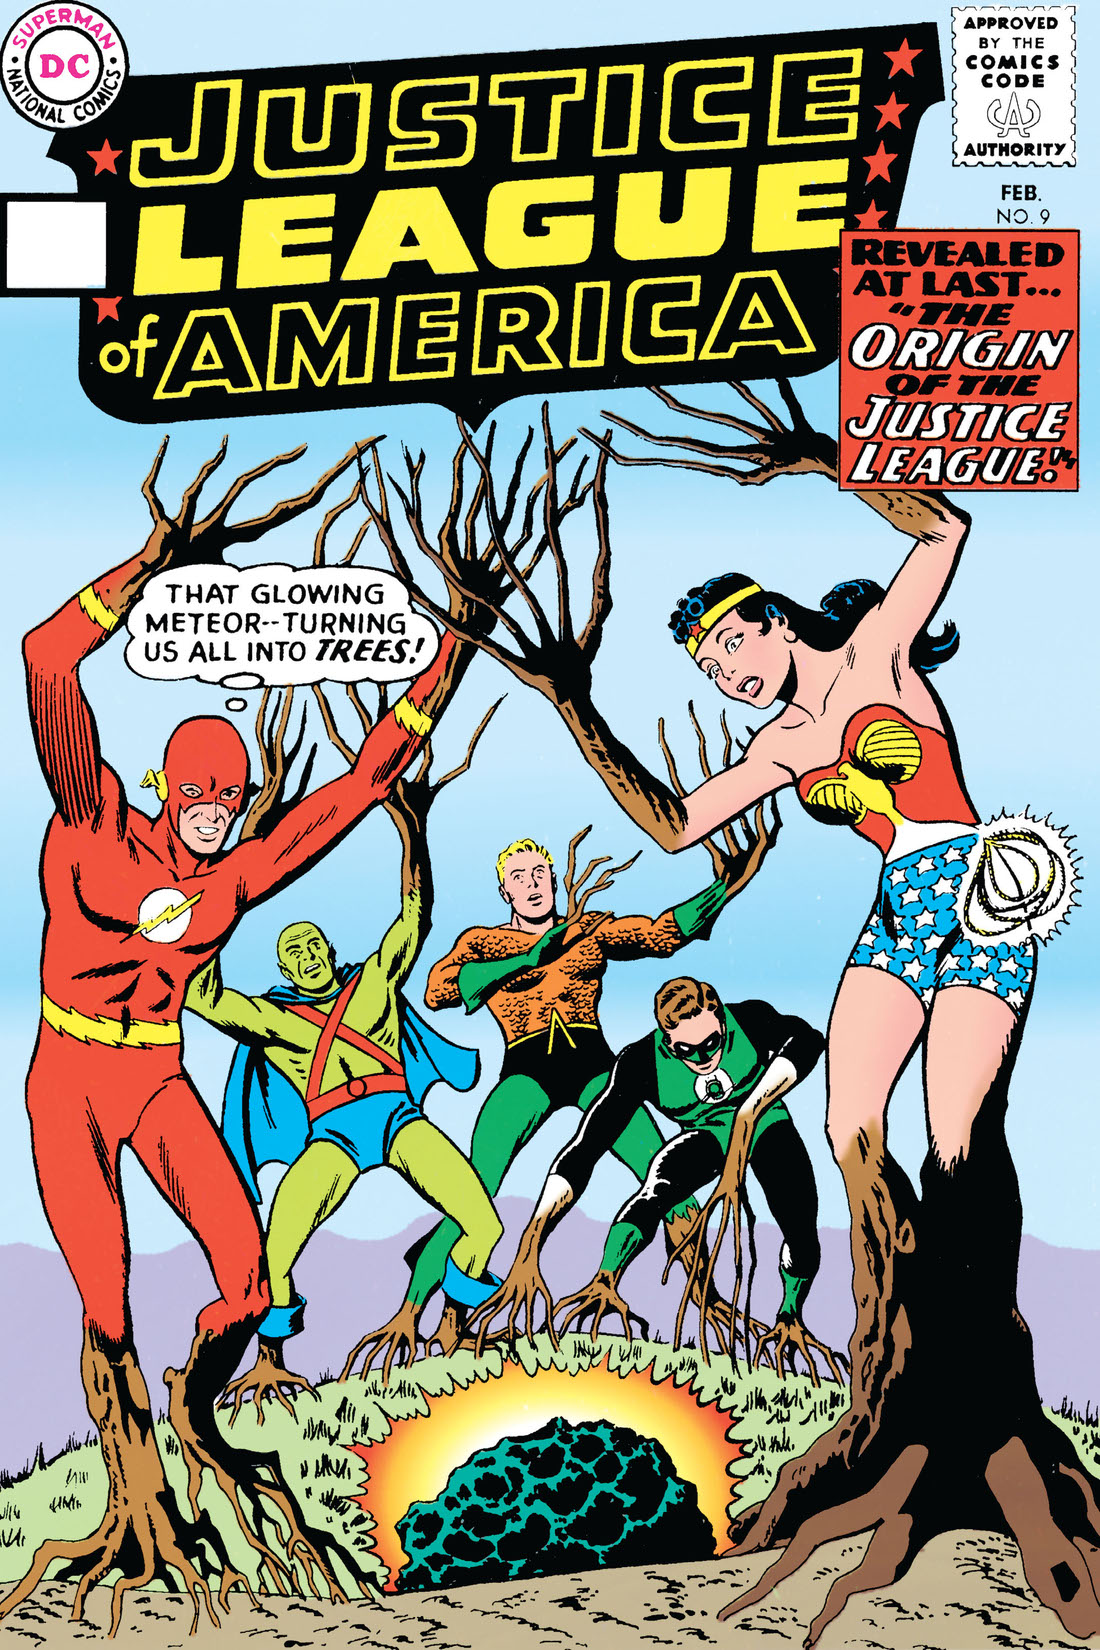 Justice League of America (1960-) #9 preview images